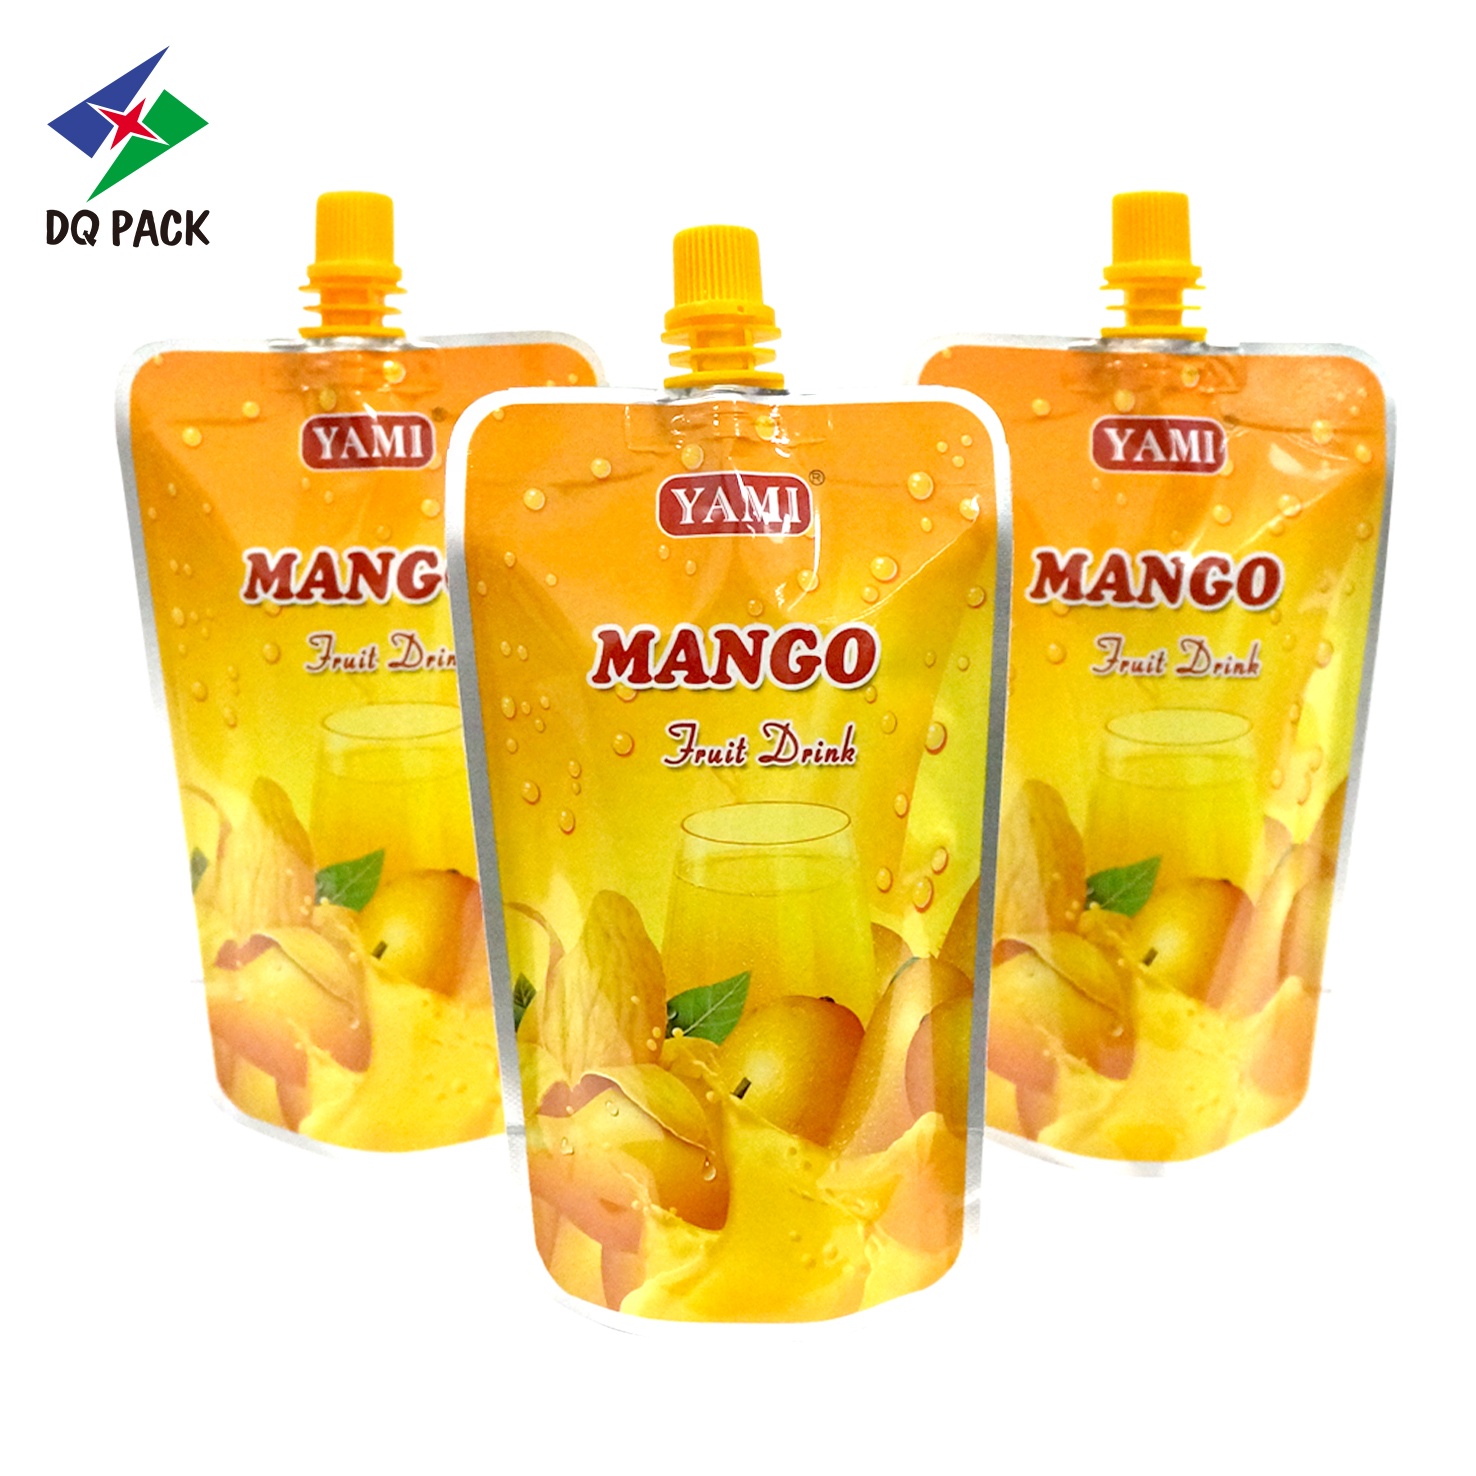 DQ PACK Custom Printed Resealable Packaging Pouch Stand up spout pouch Packaging Mango Juice